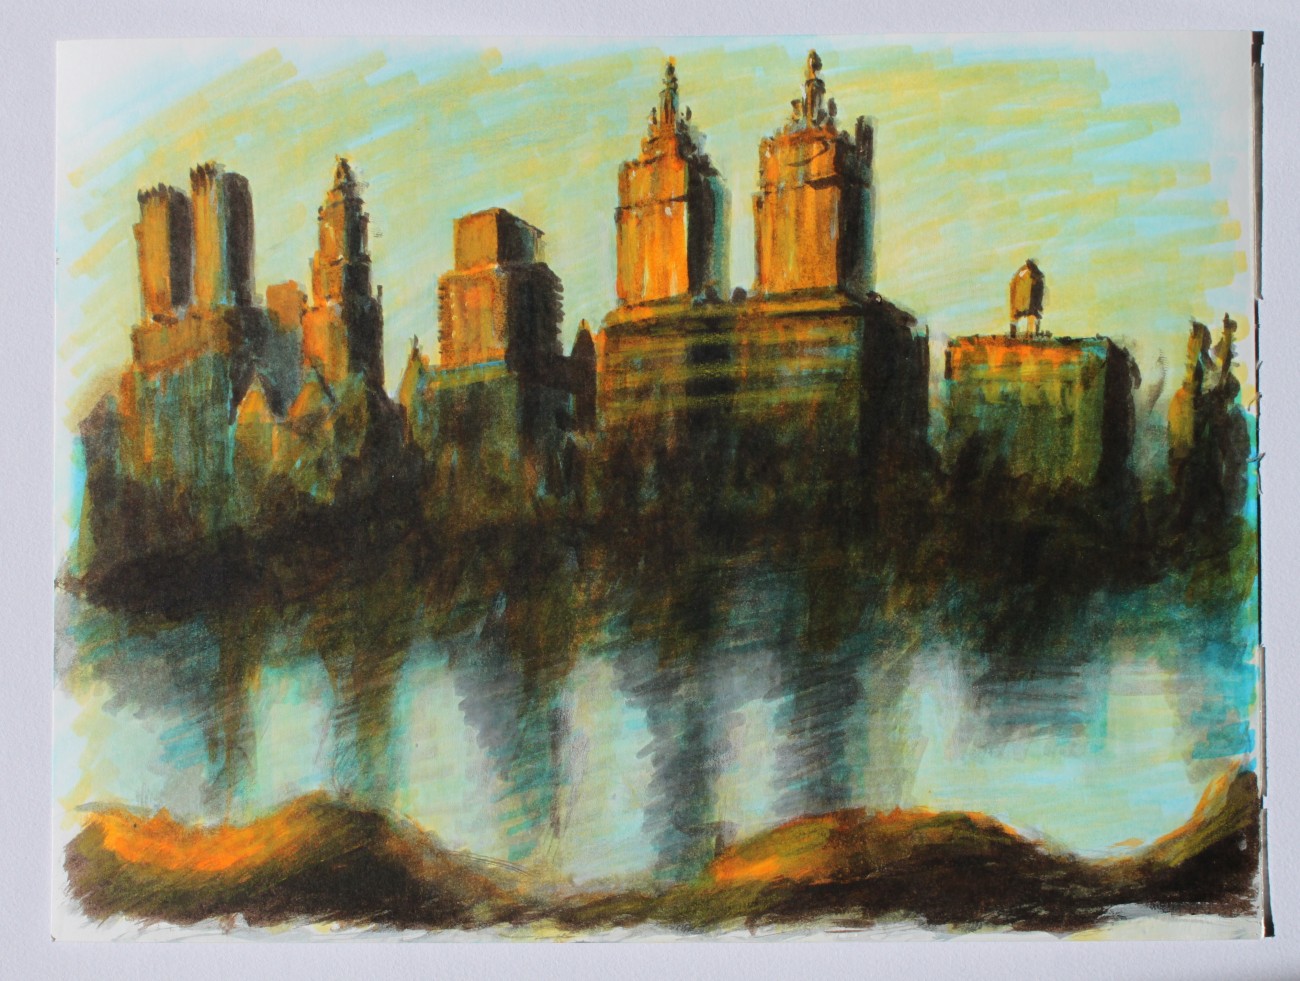 Wolfgang Leidhold, View from Central Park (watercolor on paper) 9,5 x 13 inches, 2013 View from Central Park (Wasserfarben auf Papier) 23 x 33 cm, 2013